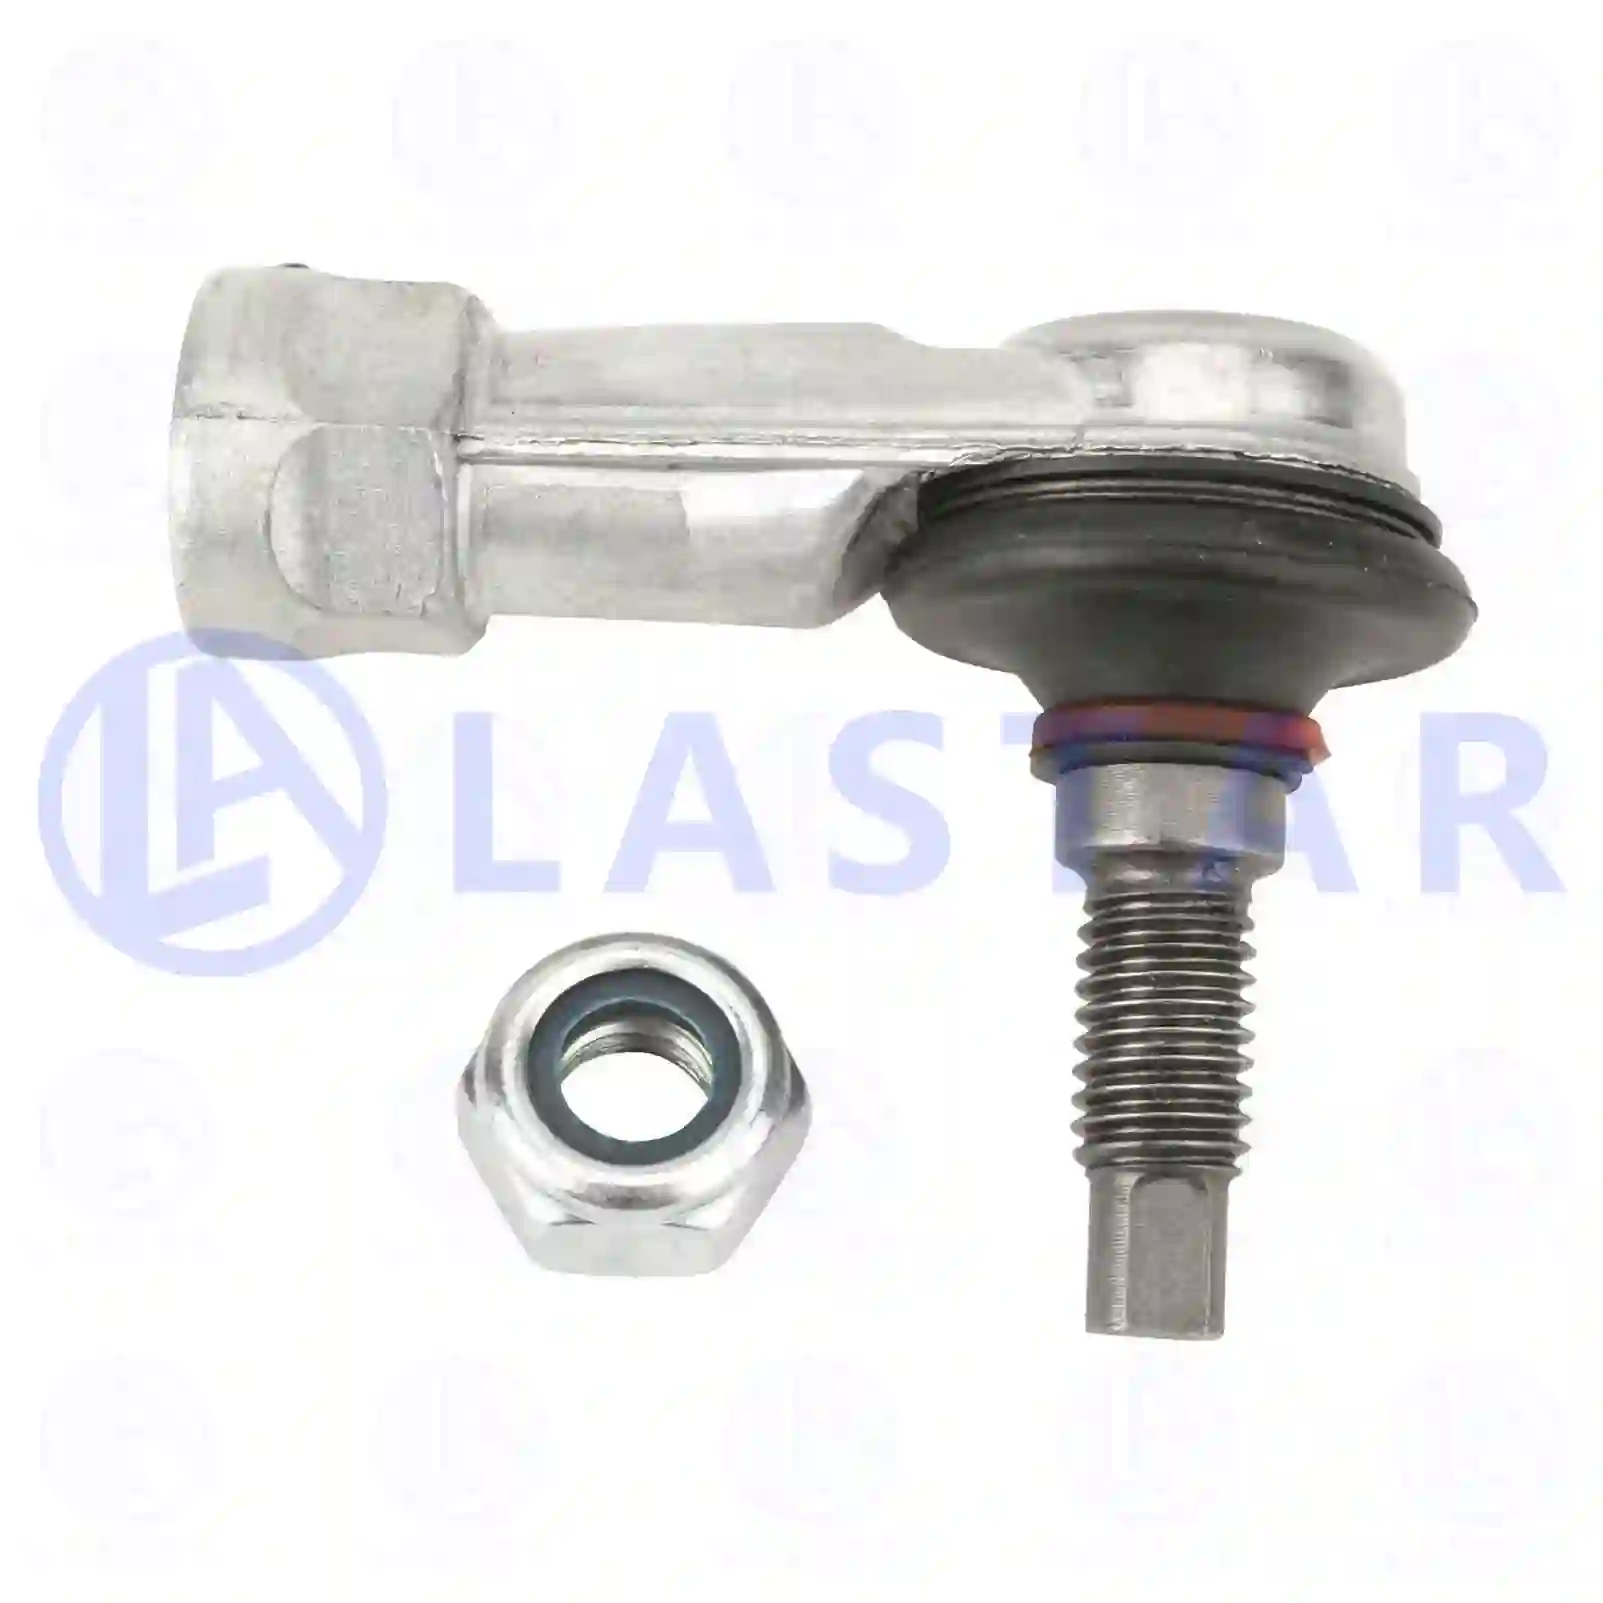 Ball joint, left hand thread, 77731618, 00021927, 0140363, 0592106, 0656084, 1249088, 140363, 1457400, 592106, 656084, 42485638, 191708, 7394145, 02524128, 08198187, 42485638, 00191708, 02524128, 08198187, 42485638, 500056188, 5001000134, 8198187, 2150021200, 5004154, 81953016063, 81953016131, 81953016171, 81953016174, 90900989011, 0002684789, 0002686189, 0002689789, 3662680489, 011010221, 34437-9X403, 5006017504, 7401190132, 1384897, 305319, 371451, 421325, 523743, 525732, 527055, 8321999836, 0928500070, 0732107019, 1190132, 11901329, 1696684, ZG40134-0008 ||  77731618 Lastar Spare Part | Truck Spare Parts, Auotomotive Spare Parts Ball joint, left hand thread, 77731618, 00021927, 0140363, 0592106, 0656084, 1249088, 140363, 1457400, 592106, 656084, 42485638, 191708, 7394145, 02524128, 08198187, 42485638, 00191708, 02524128, 08198187, 42485638, 500056188, 5001000134, 8198187, 2150021200, 5004154, 81953016063, 81953016131, 81953016171, 81953016174, 90900989011, 0002684789, 0002686189, 0002689789, 3662680489, 011010221, 34437-9X403, 5006017504, 7401190132, 1384897, 305319, 371451, 421325, 523743, 525732, 527055, 8321999836, 0928500070, 0732107019, 1190132, 11901329, 1696684, ZG40134-0008 ||  77731618 Lastar Spare Part | Truck Spare Parts, Auotomotive Spare Parts